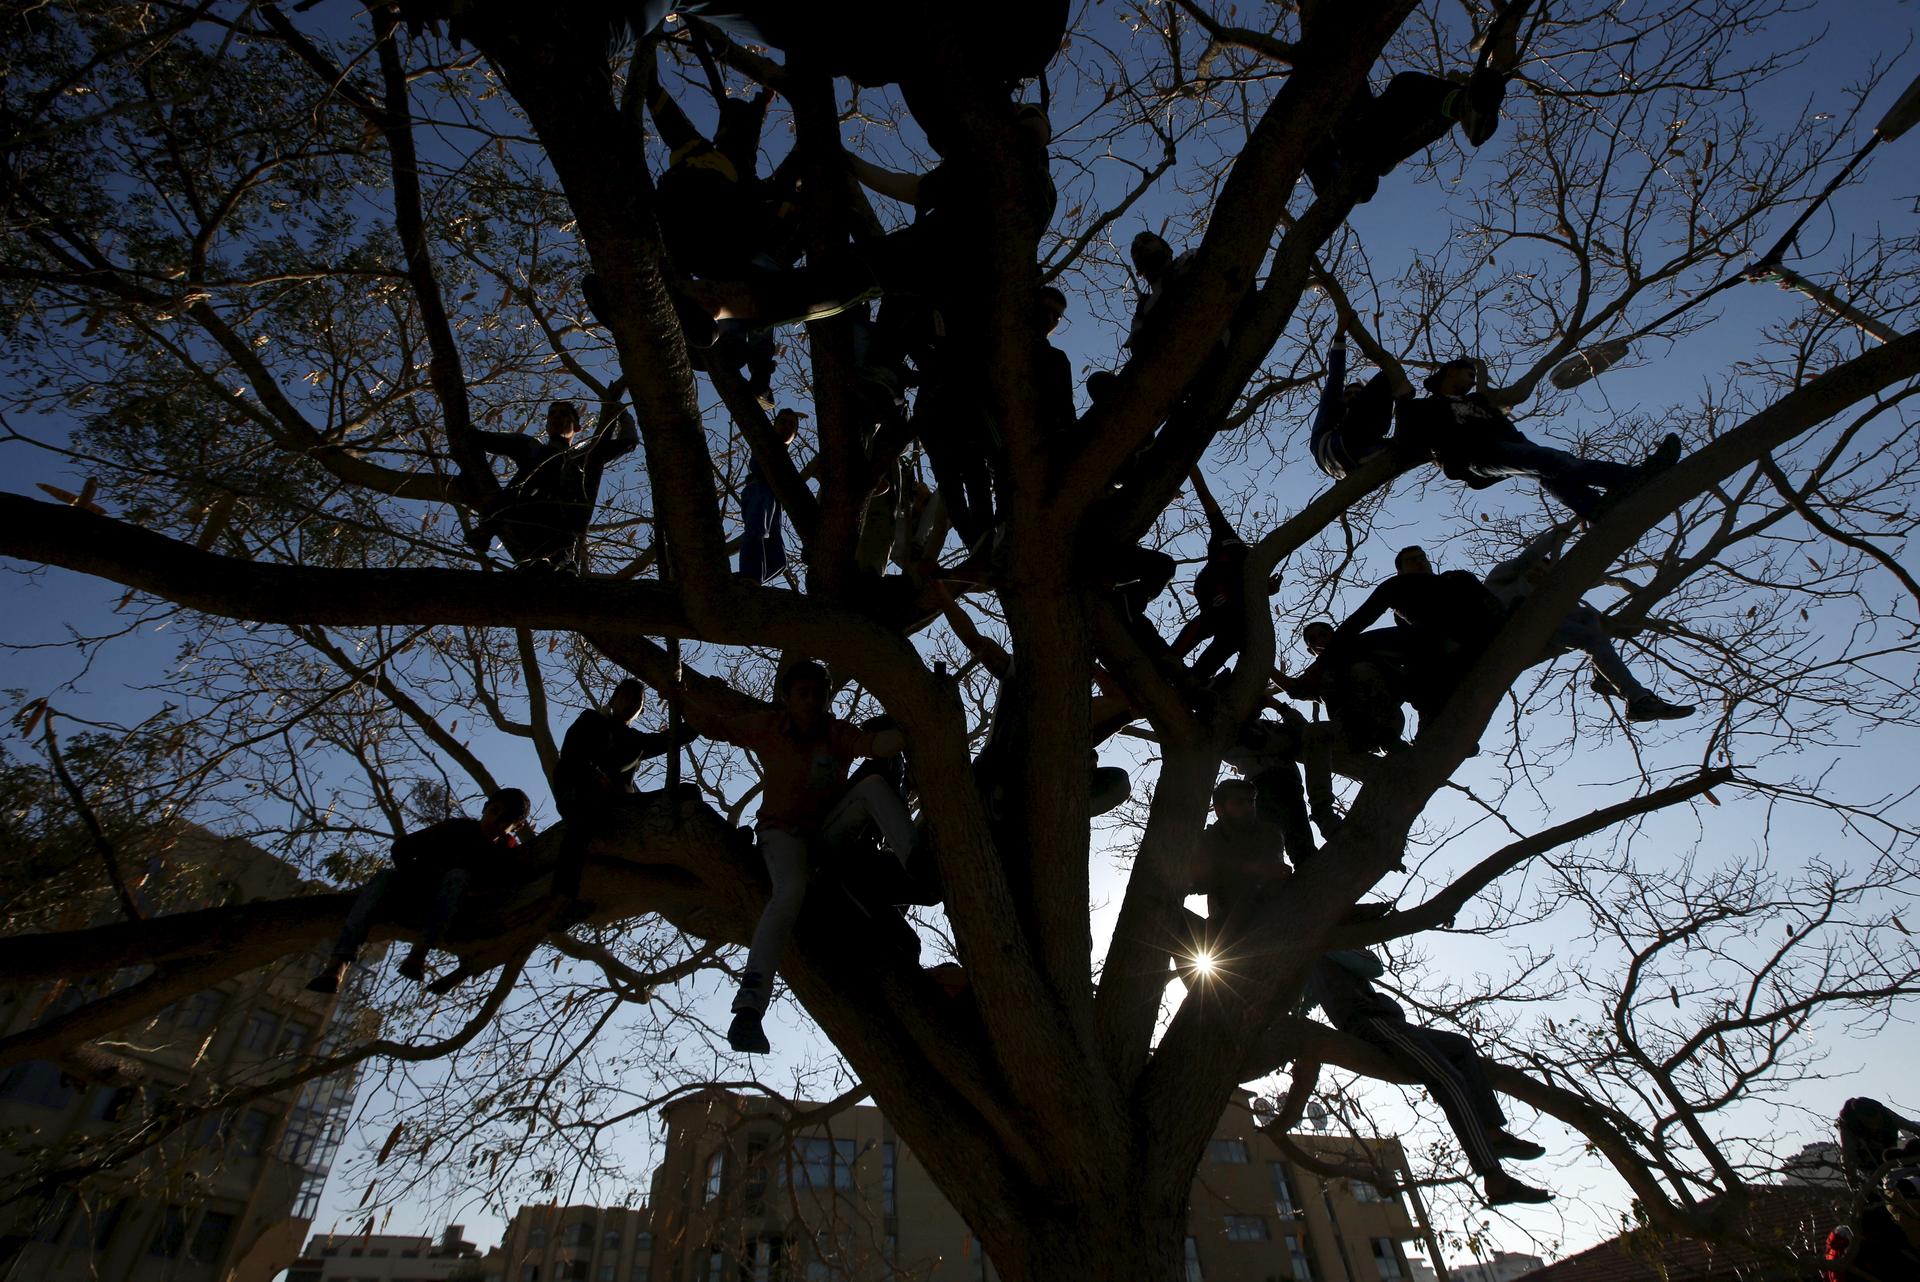 People in a tree